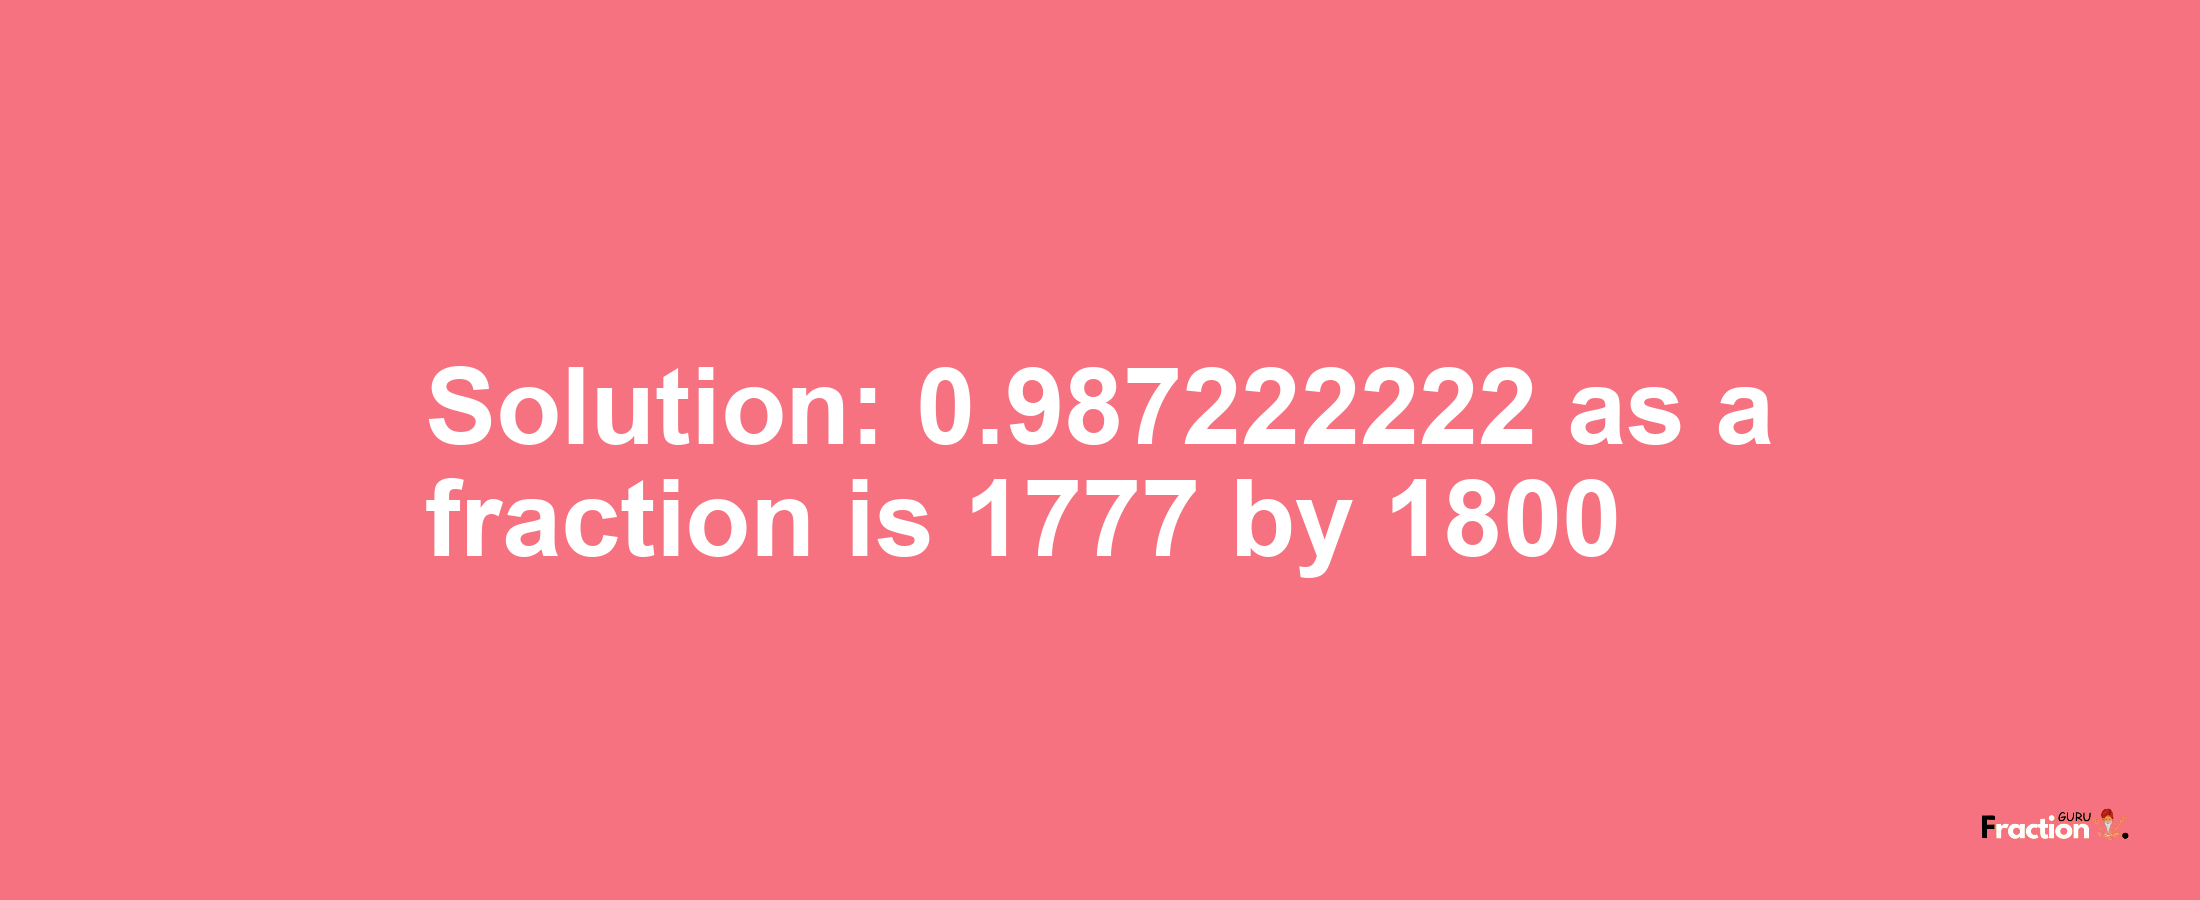 Solution:0.987222222 as a fraction is 1777/1800